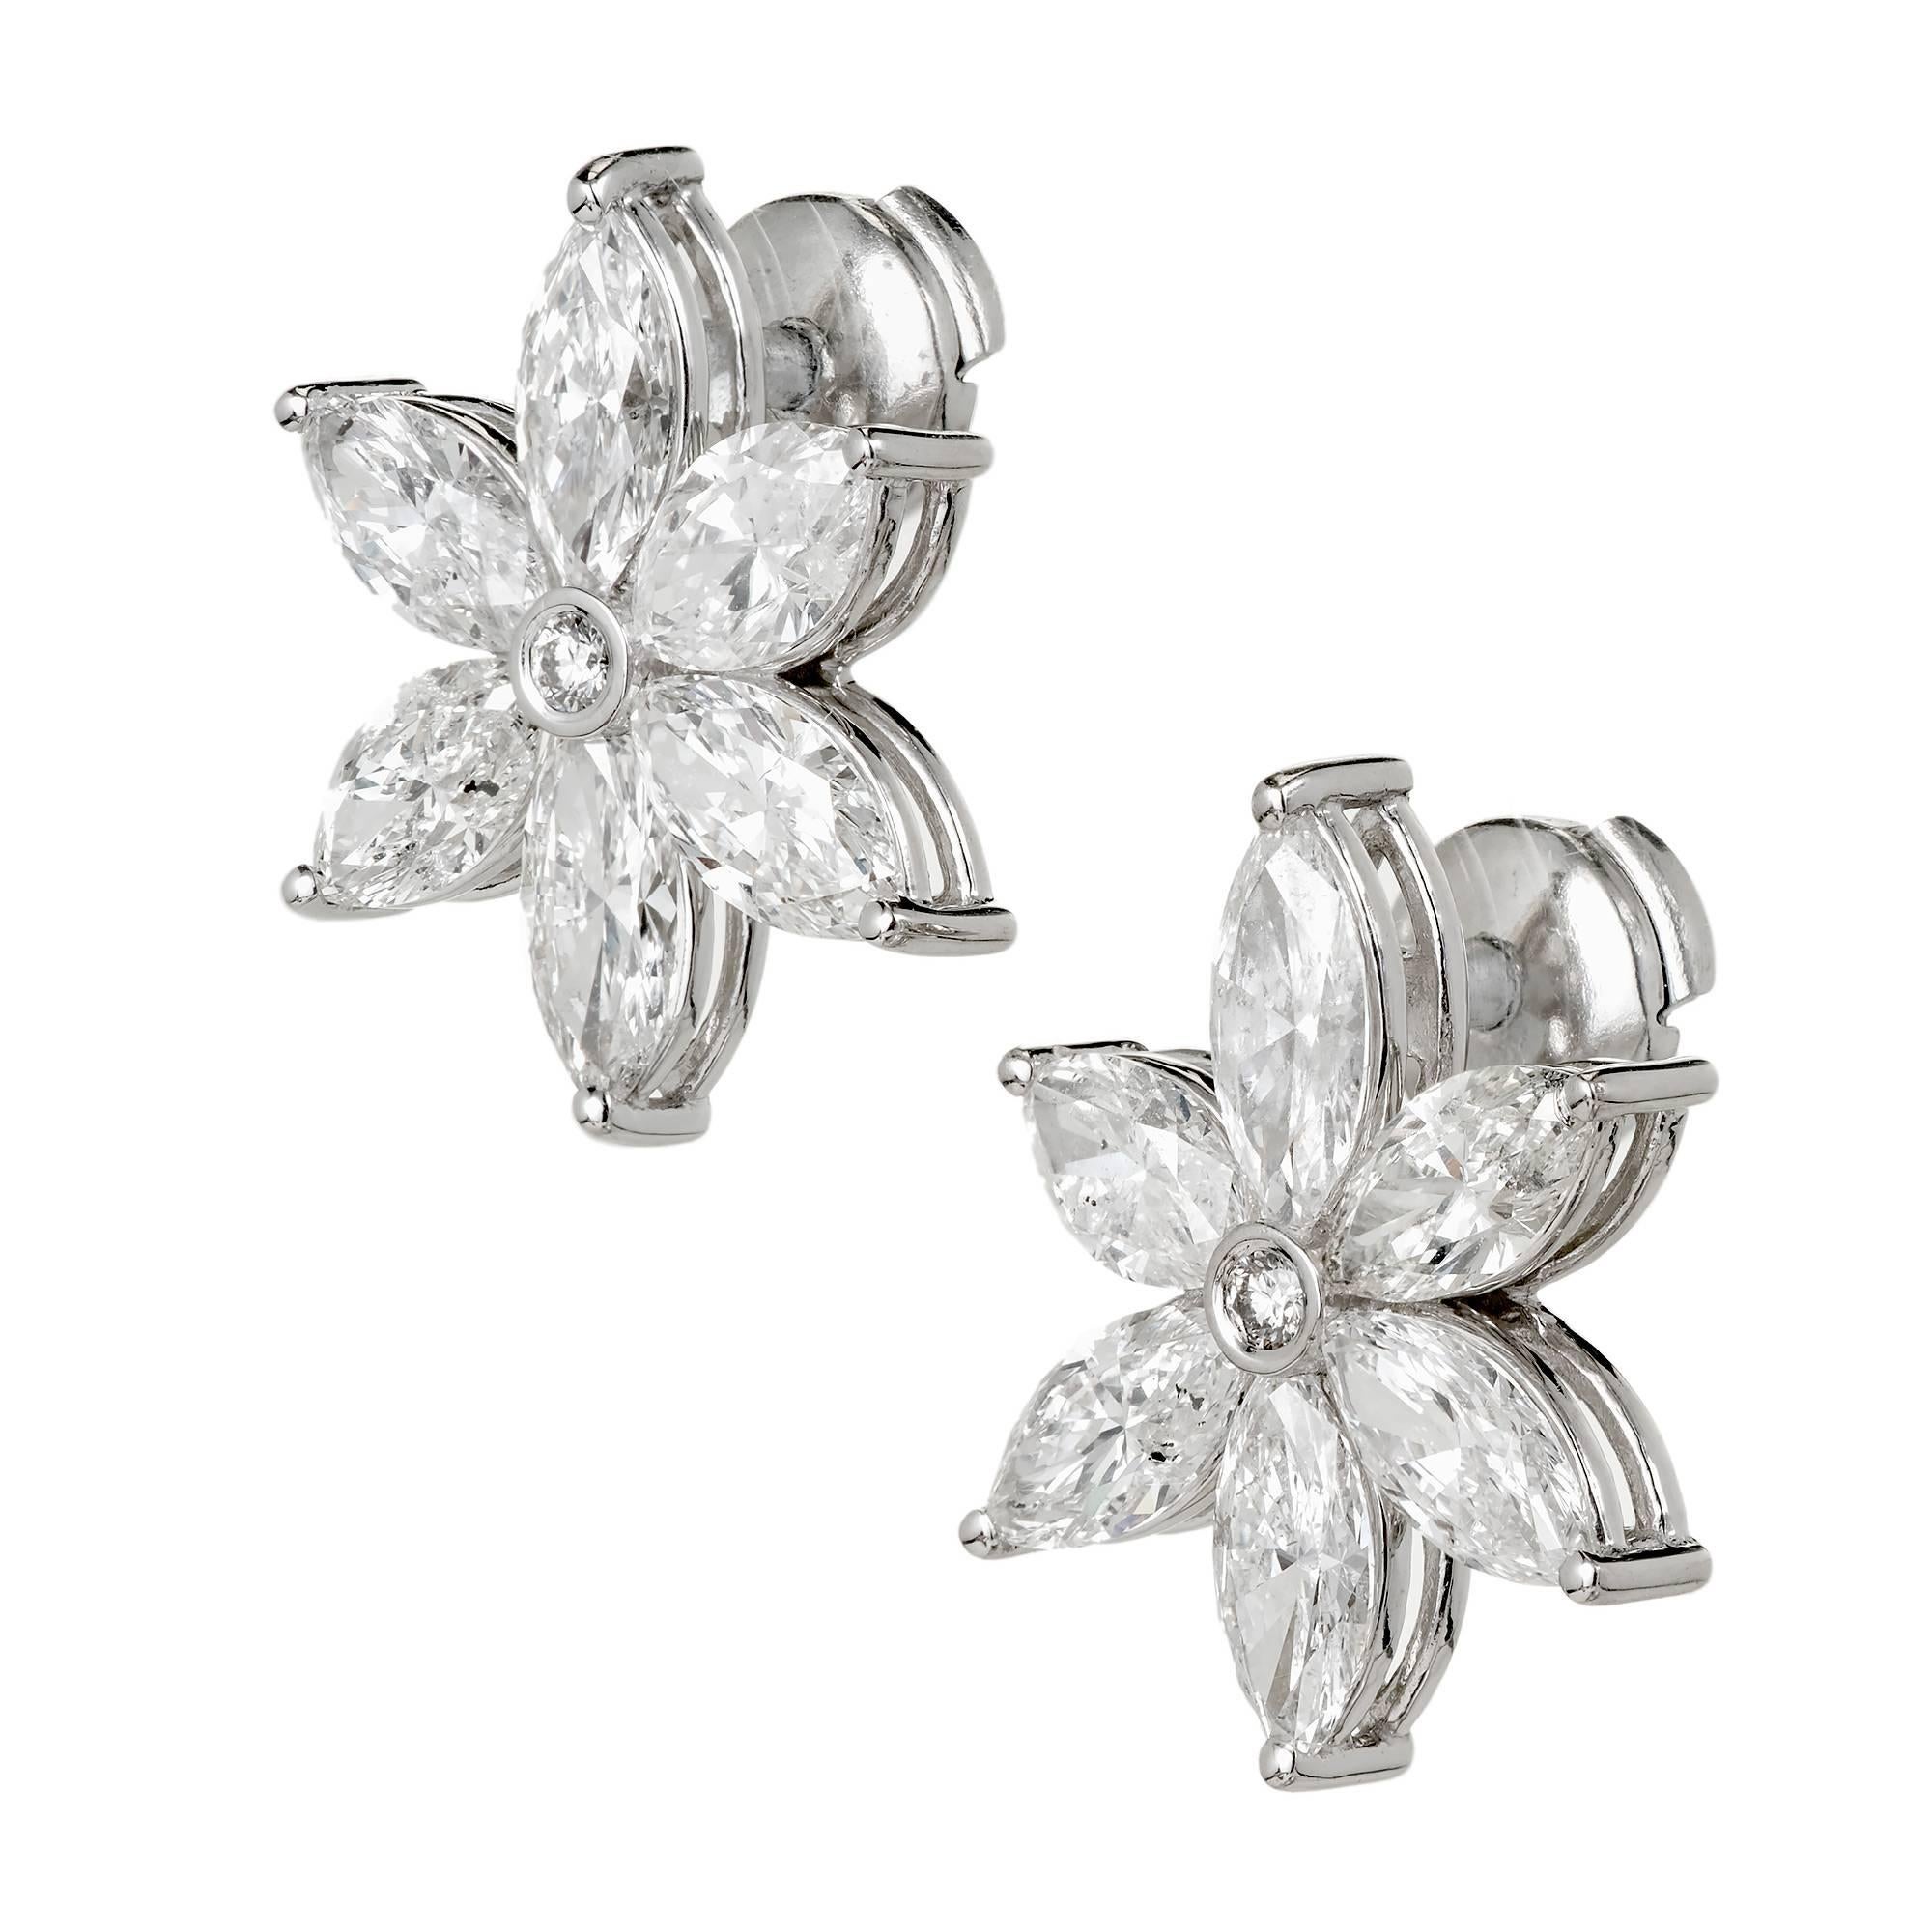 Peter Suchy Jewelers 6.41ct Marquise Diamond Platinum earrings. Bright sparkly fine white F color Diamonds. Handmade Platinum settings. La Pousette safety backs.

12 Marquise Diamonds, approx. total weight 6.41cts, SI1 – I 1
2 round Diamonds,